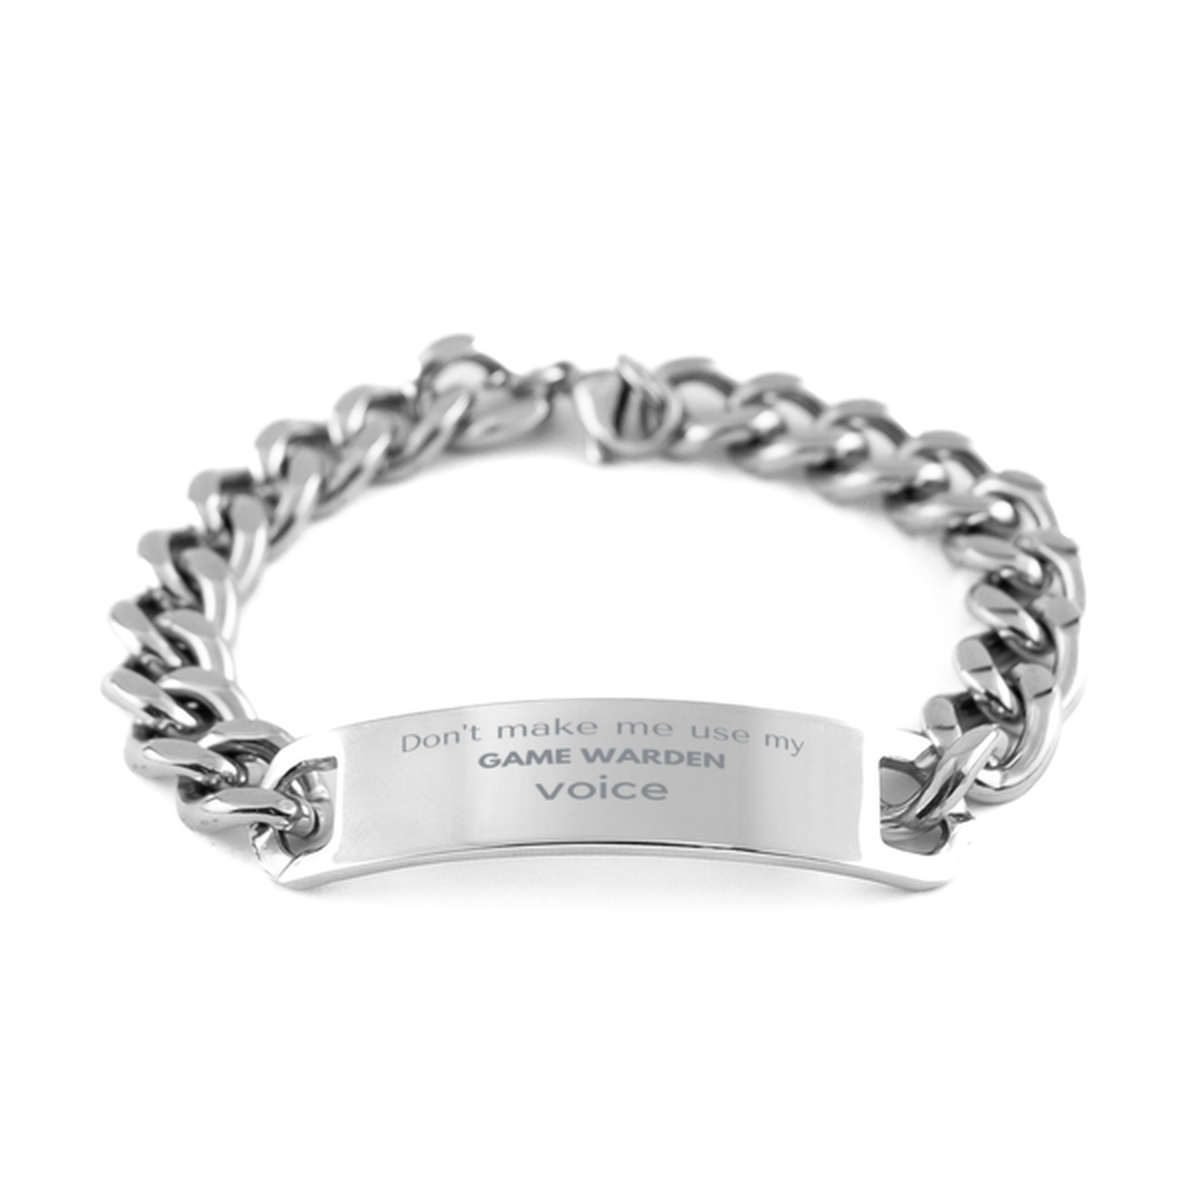 Don't make me use my Game Warden voice, Sarcasm Game Warden Gifts, Christmas Game Warden Cuban Chain Stainless Steel Bracelet Birthday Unique Gifts For Game Warden Coworkers, Men, Women, Colleague, Friends